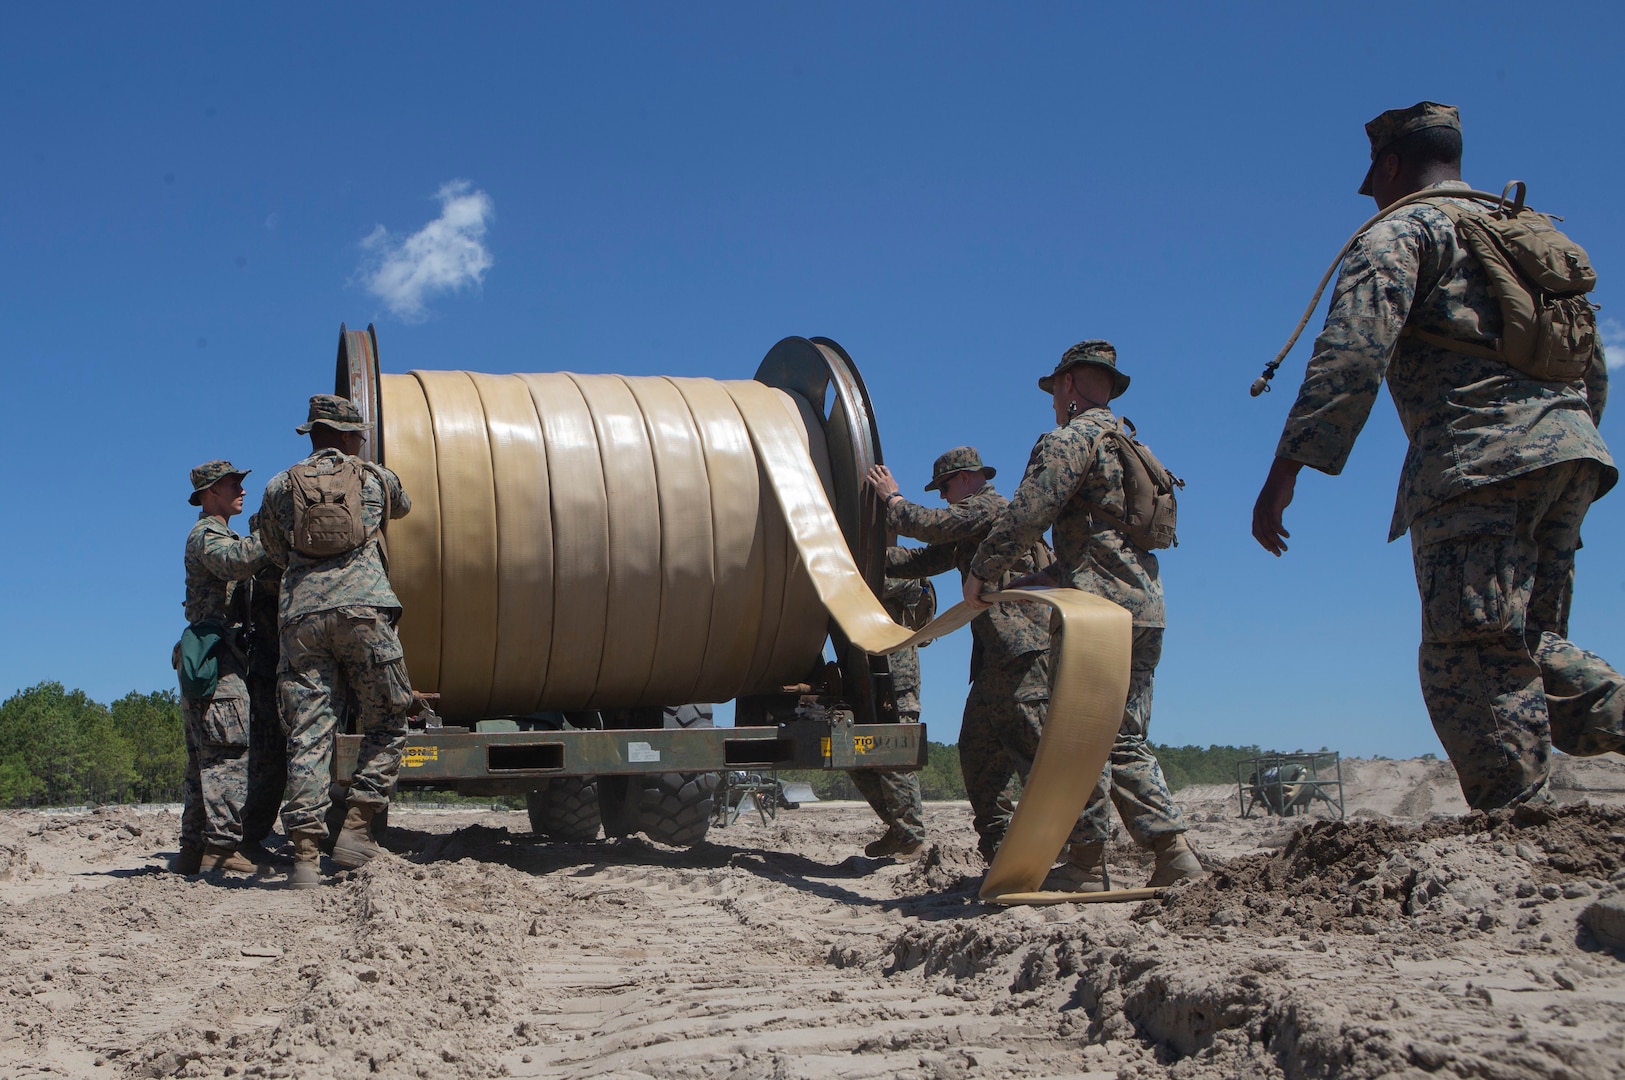 U.S. Marines with Bulk Fuel Company, 8th Engineer Support Battalion, 2nd Marine Logistics Group, utilize a hose-reel system to lay down a fuel line during a Bulk Fuel exercise at Camp Lejeune, N.C., June 19, 2019. The Marines with 8th ESB ran fuel lines, patrolled the fuel sites and provided all around security to remain proficient in fueling support operations. (U.S. Marine Corps photo by Lance Cpl. Adaezia L. Chavez)